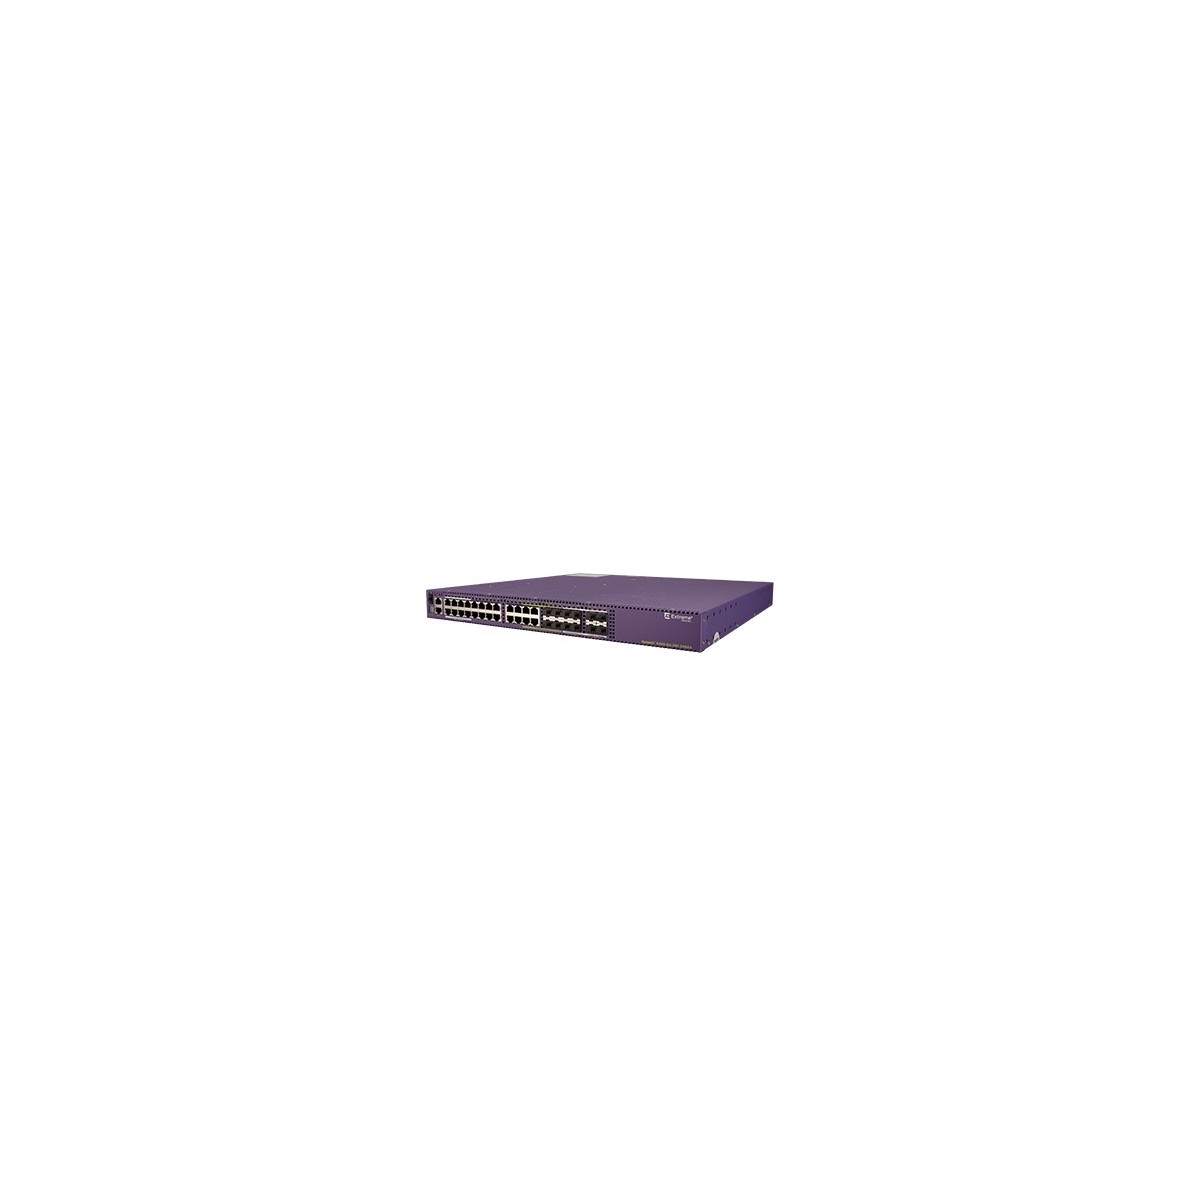 Extreme Networks X460-G2-24P-10GE4-FB-715-TAA - Managed - L2/L3 - Gigabit Ethernet (10/100/1000) - Power over Ethernet (PoE) - R